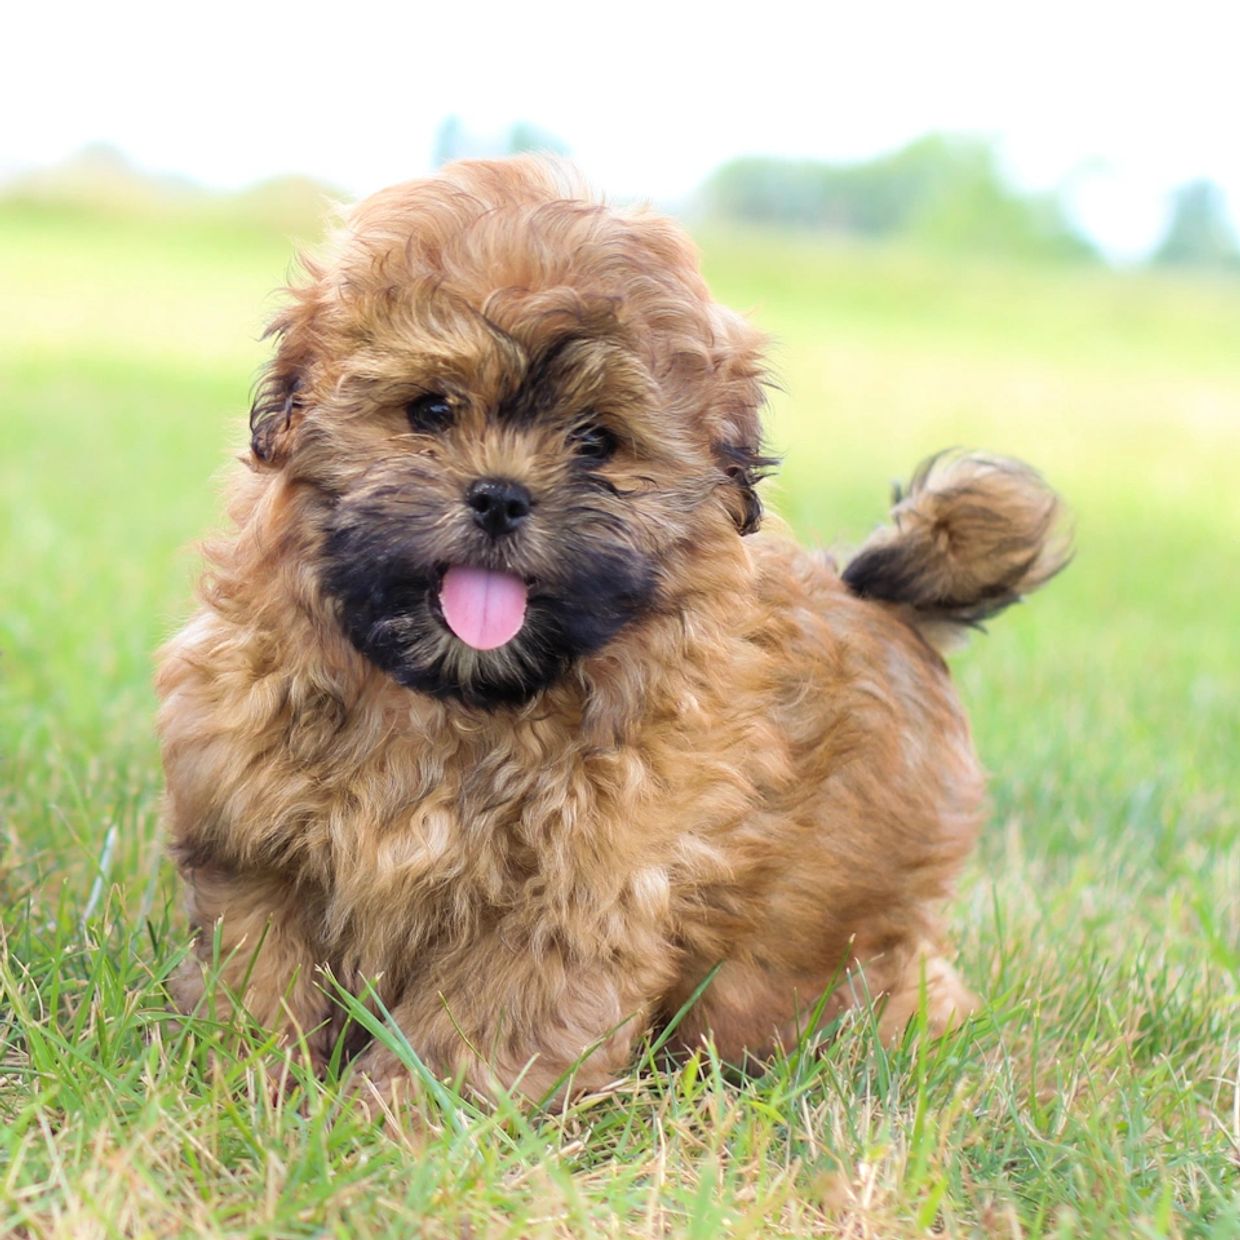 Shihpoo puppies for sale, Shichon puppies, Shihpoo puppies, teddy bear puppies, poodle mix, shih poo